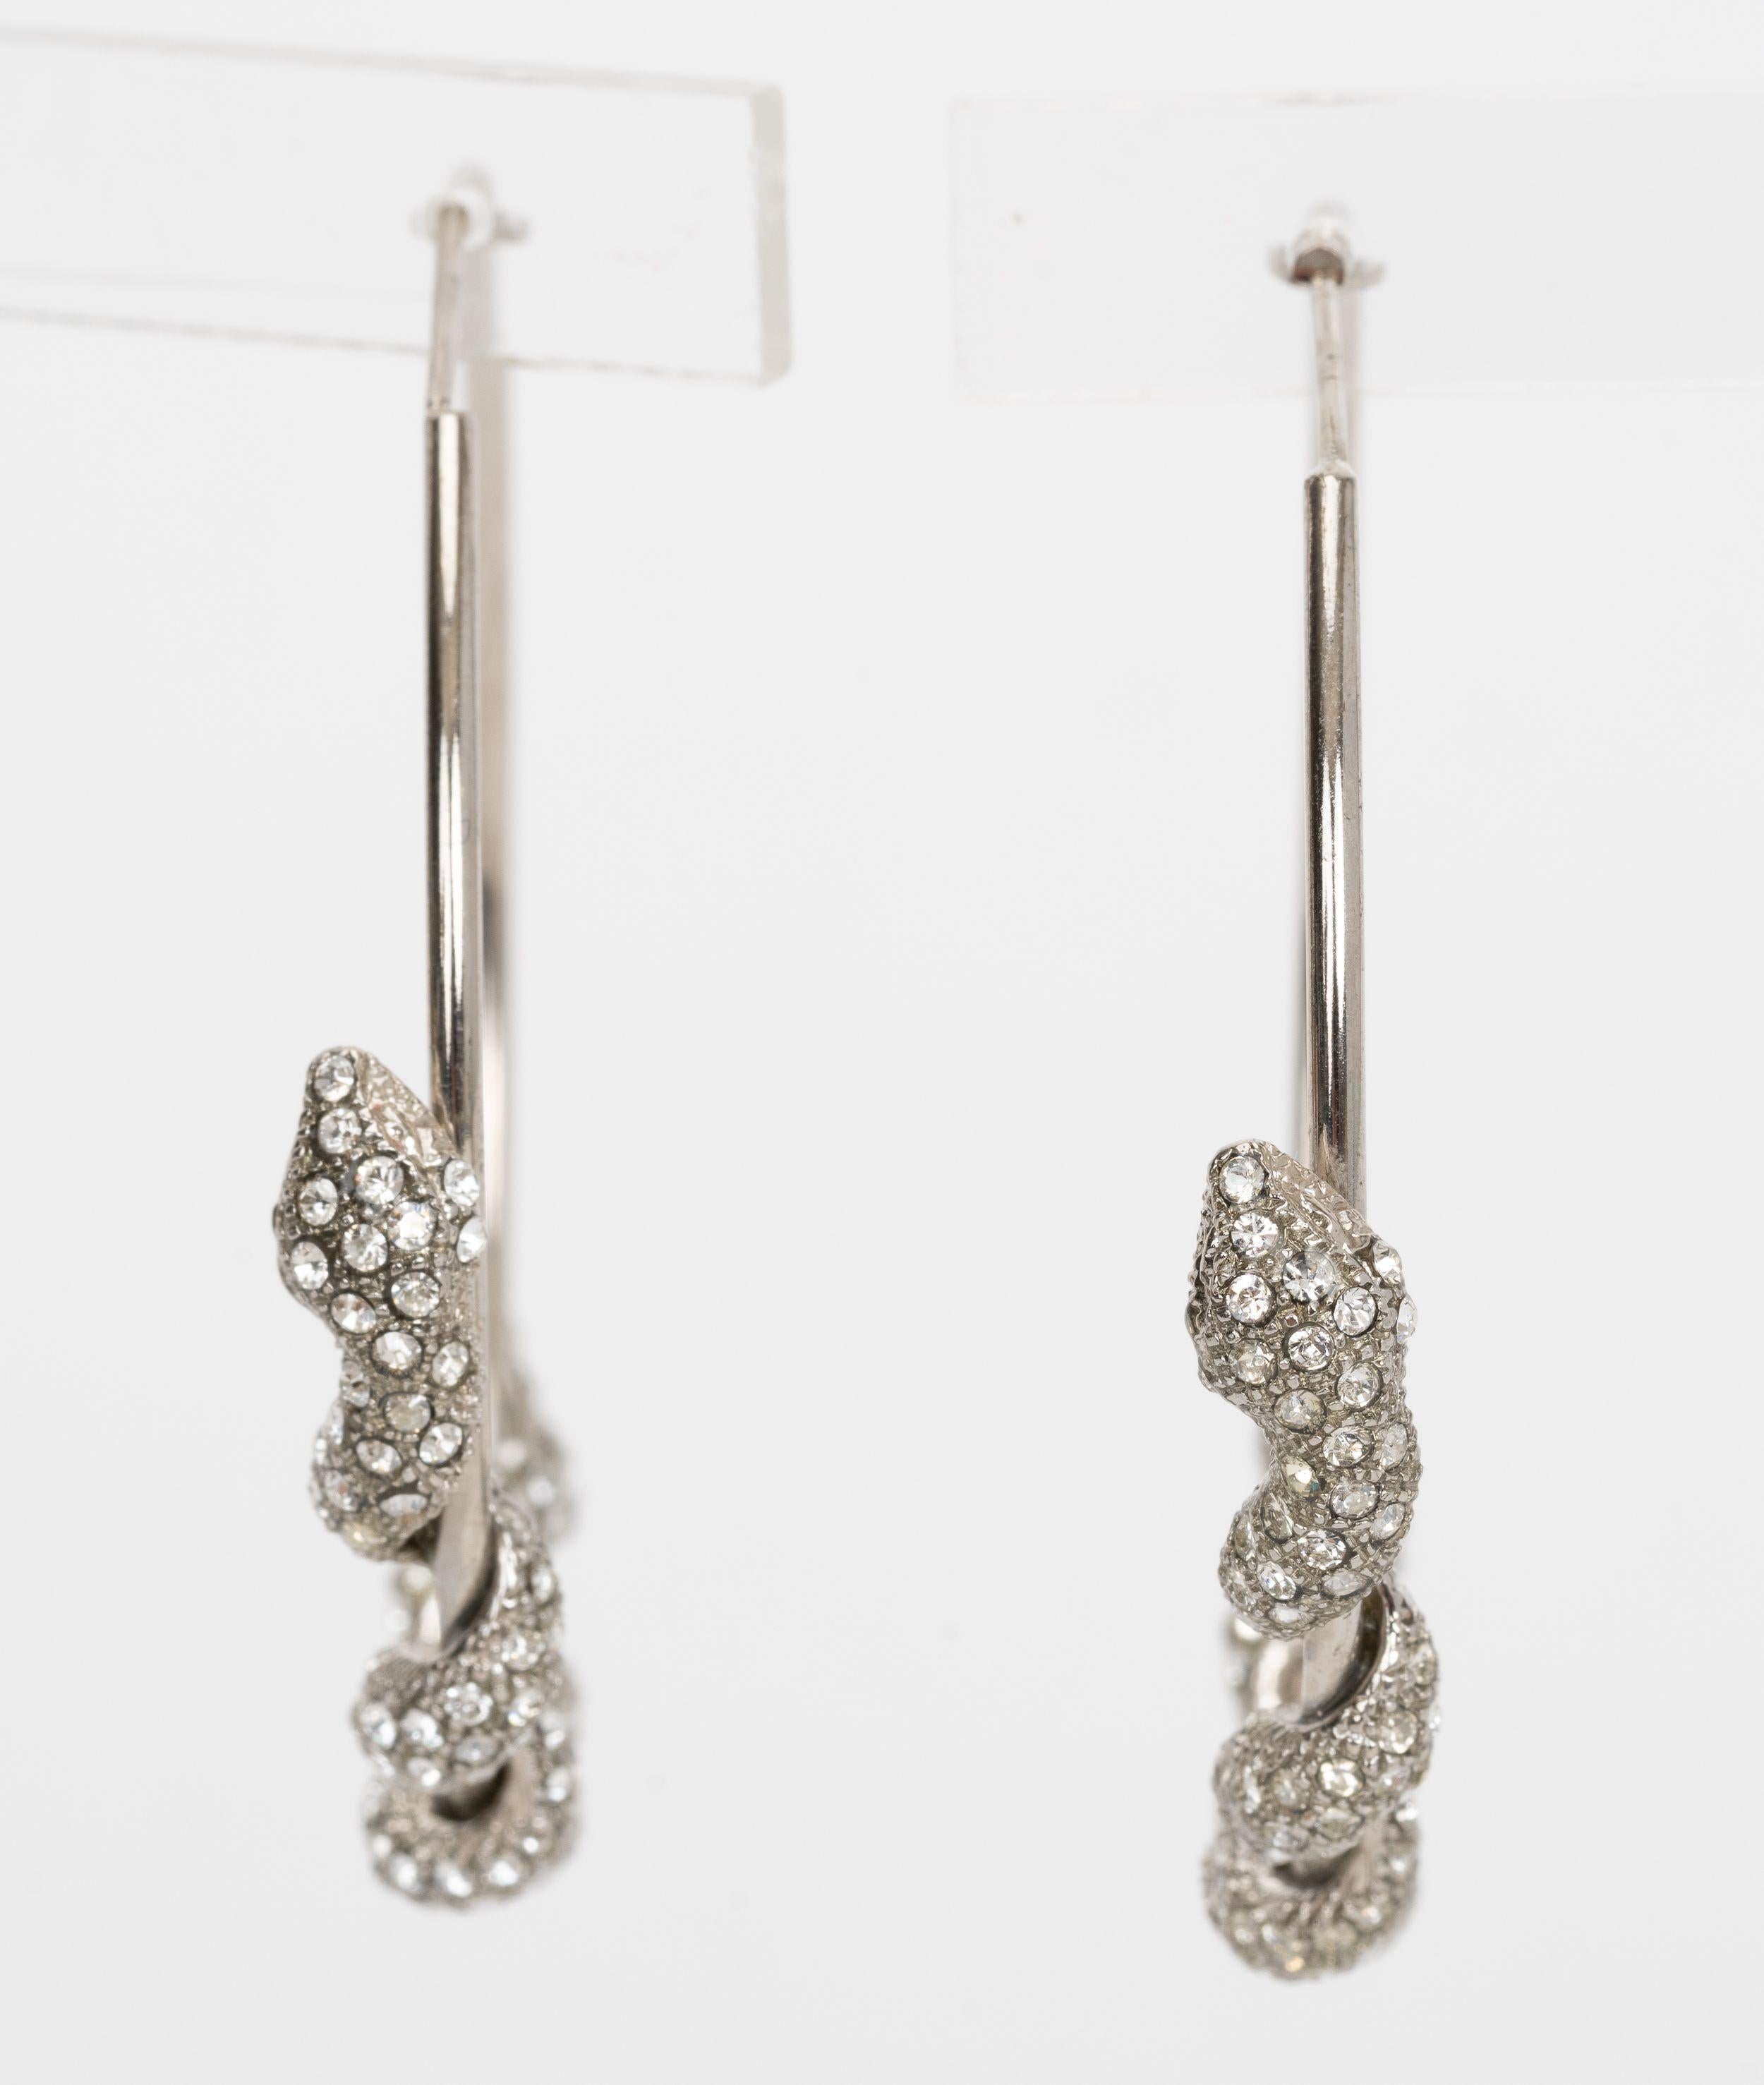 Roberto Cavalli Snake Hoop Earrings with silver toned crystal embellished snake wrapped earrings are edgy but elegant all at the same time. Come with velvet pouch.